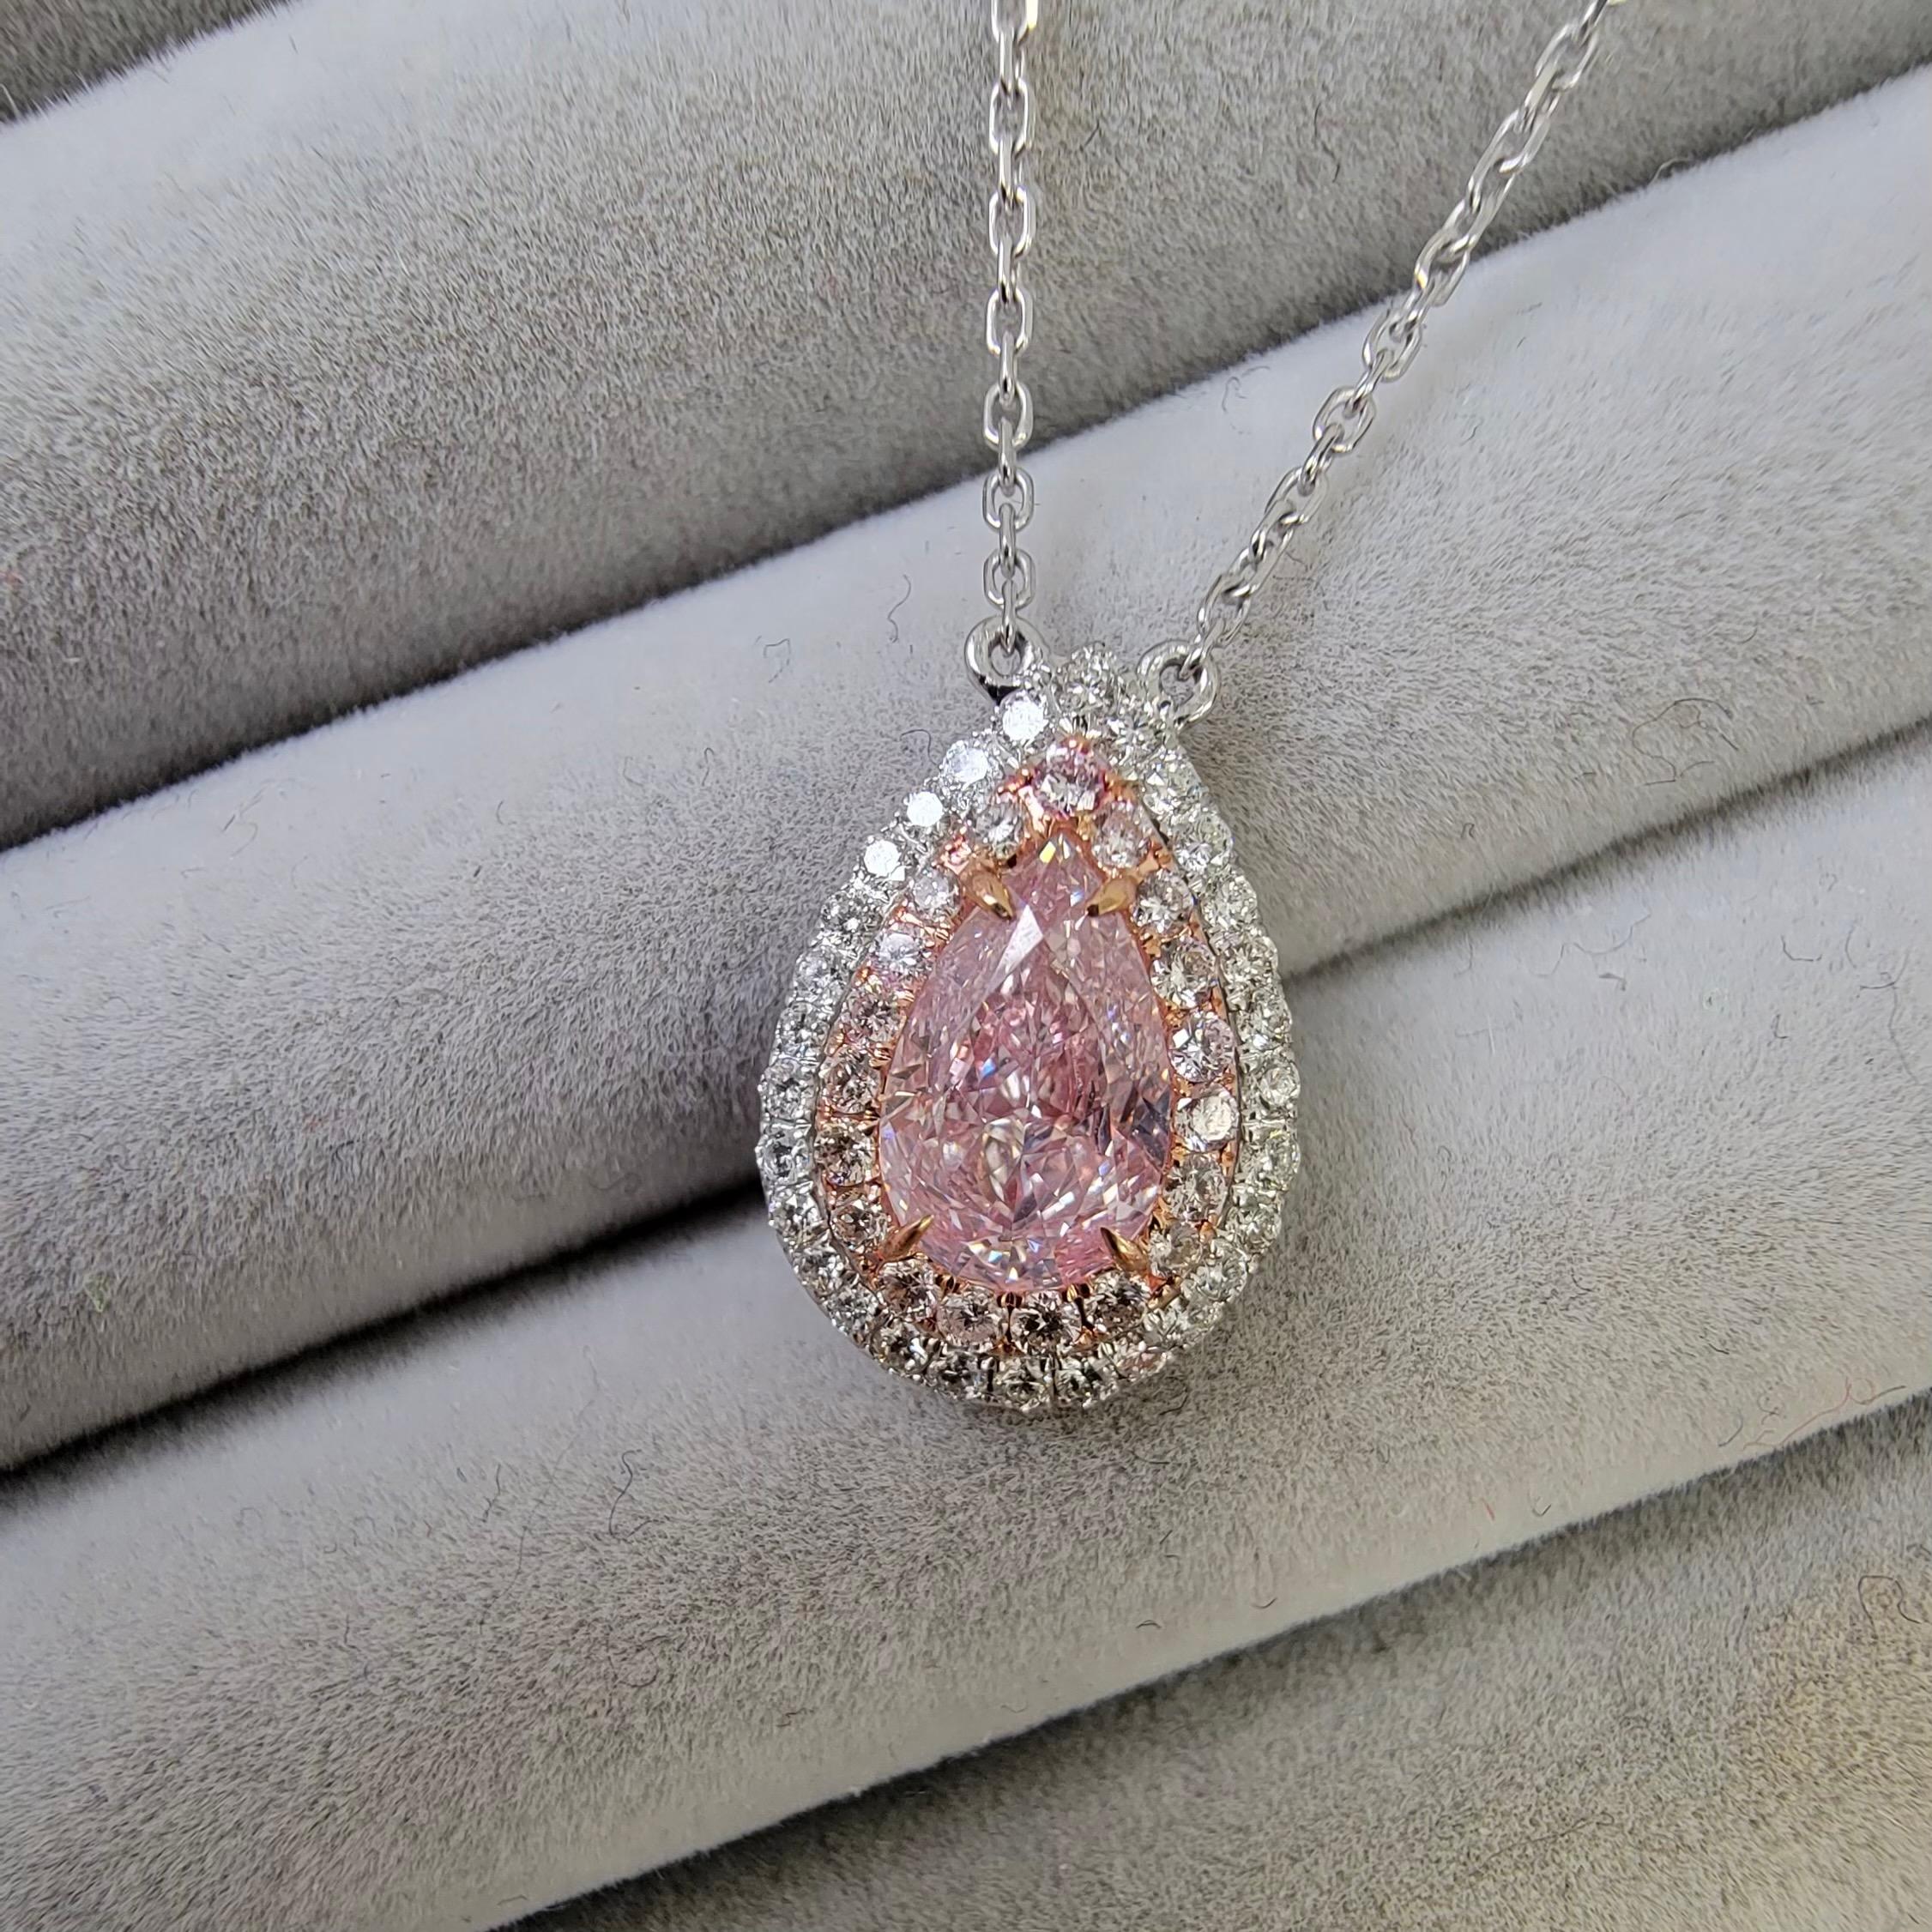 1.02 Carat Center
GIA Light Pink-Brown
Pear Shape Diamond
SI1 Clarity 
0.32 Carats of Surrounding Diamonds
18 Inch Chain
Crafted in 18k Gold
Handmade in NYC
GIA Certified Diamond

This piece can be viewed before purchase in our showroom in NYC, or